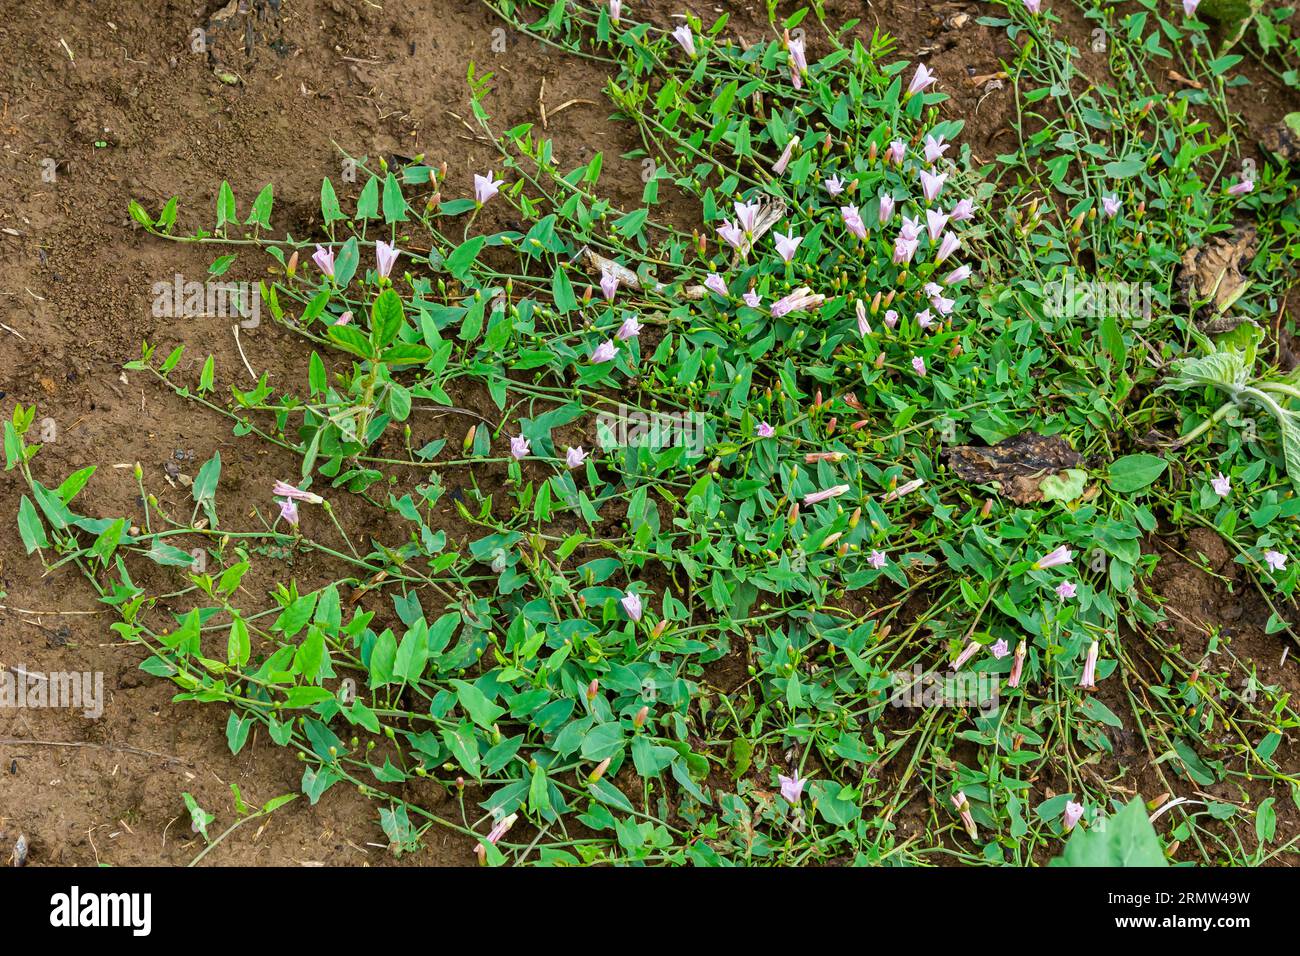 Field bindweed or Convolvulus arvensis European bindweed Creeping Jenny Possession vine herbaceous perennial plant with open and closed white flowers Stock Photo